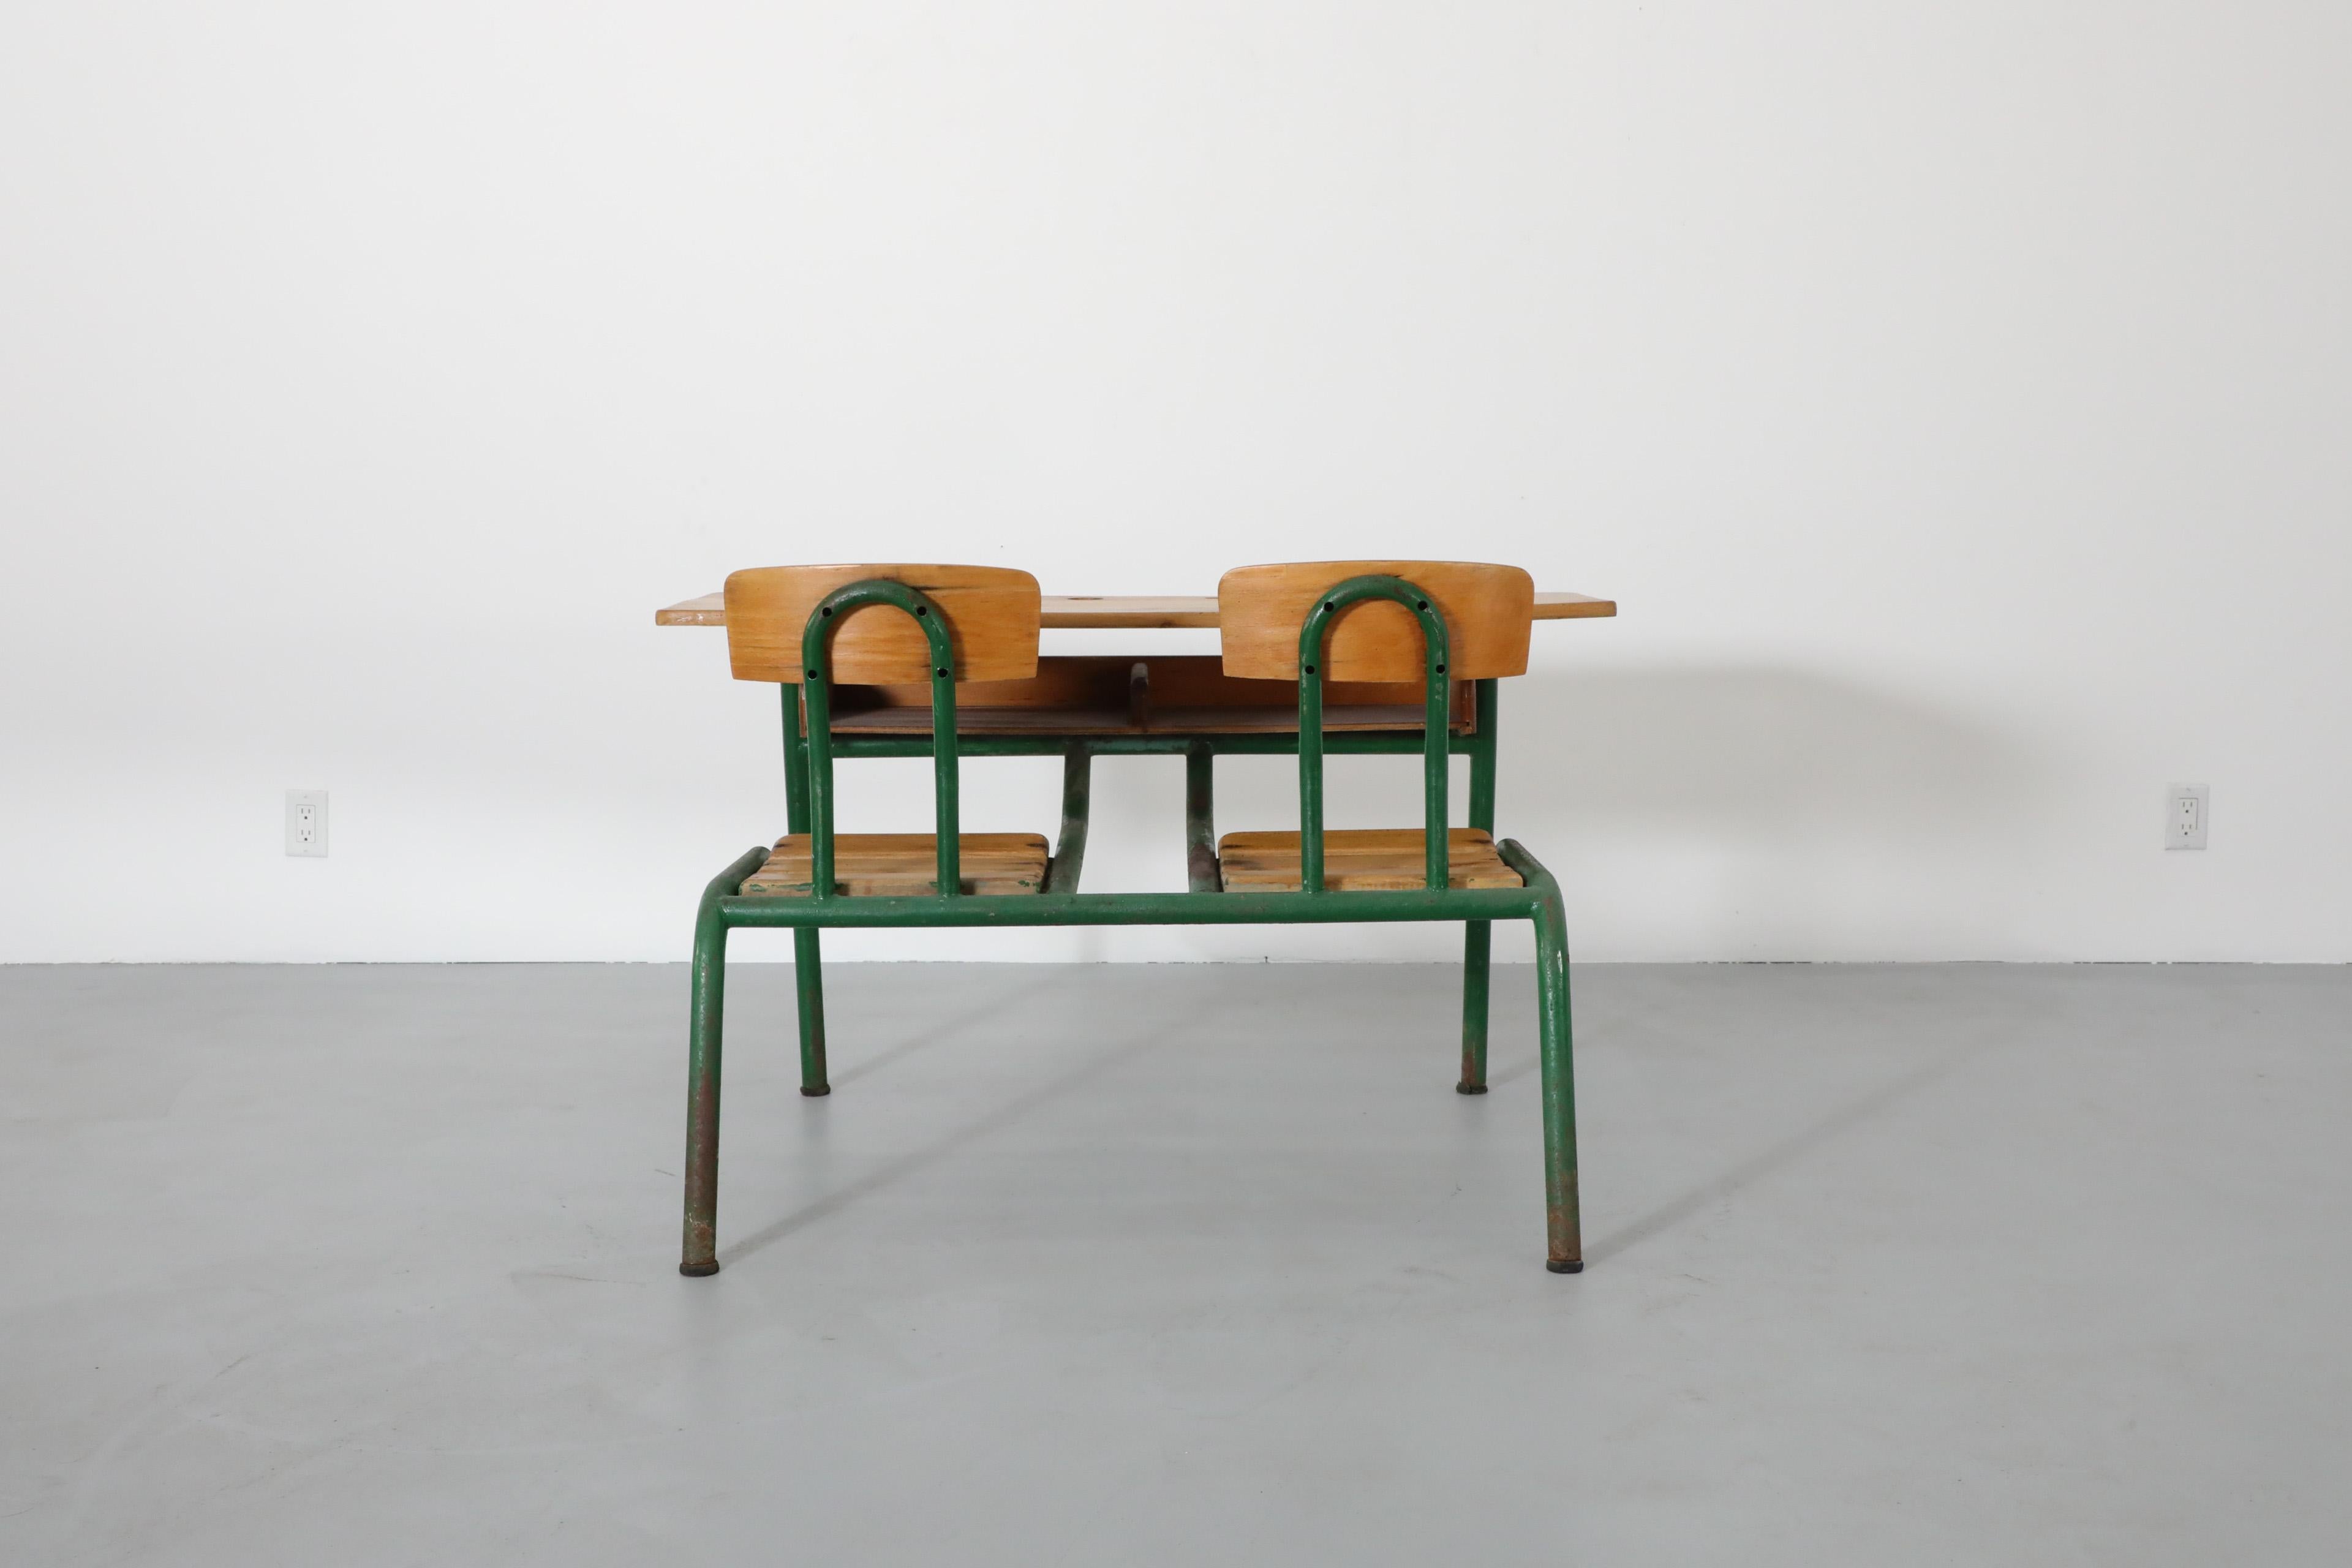 Enameled Industrial 1950s French Tandem School Desk by Matco